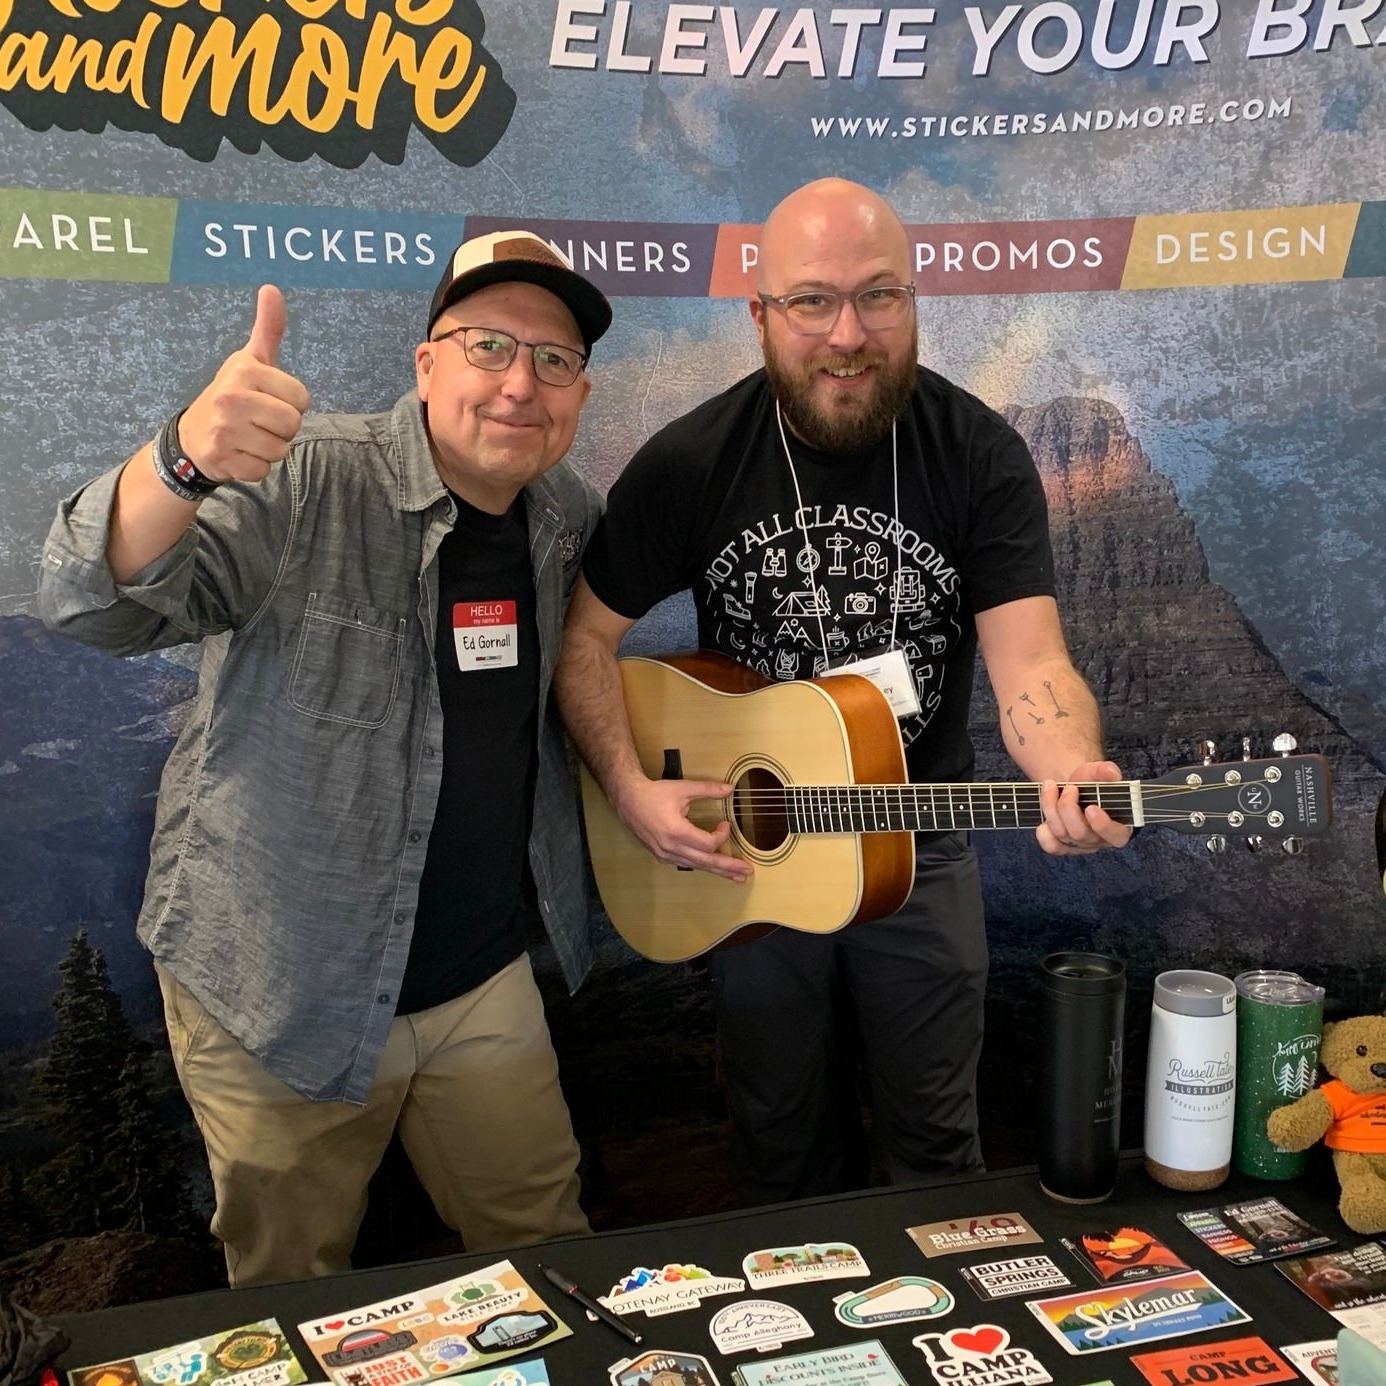 Congrats to Kevin from Quaker Haven Camp (official) on winning the guitar at the Christian Camp and Conference Association 2023 Indiana/Ohio Super Sectional Conference. We love seeing happy faces at our booths. Looking to elevate your brand, with some new merch? Check out our website and see how we can help get your brand to the place you dream of it being.
https://stickersandmore.com/camp/
@quakerhavencamp #camp #guitar #CCCA #camplife #winnerswin #merchshop #churchcamp